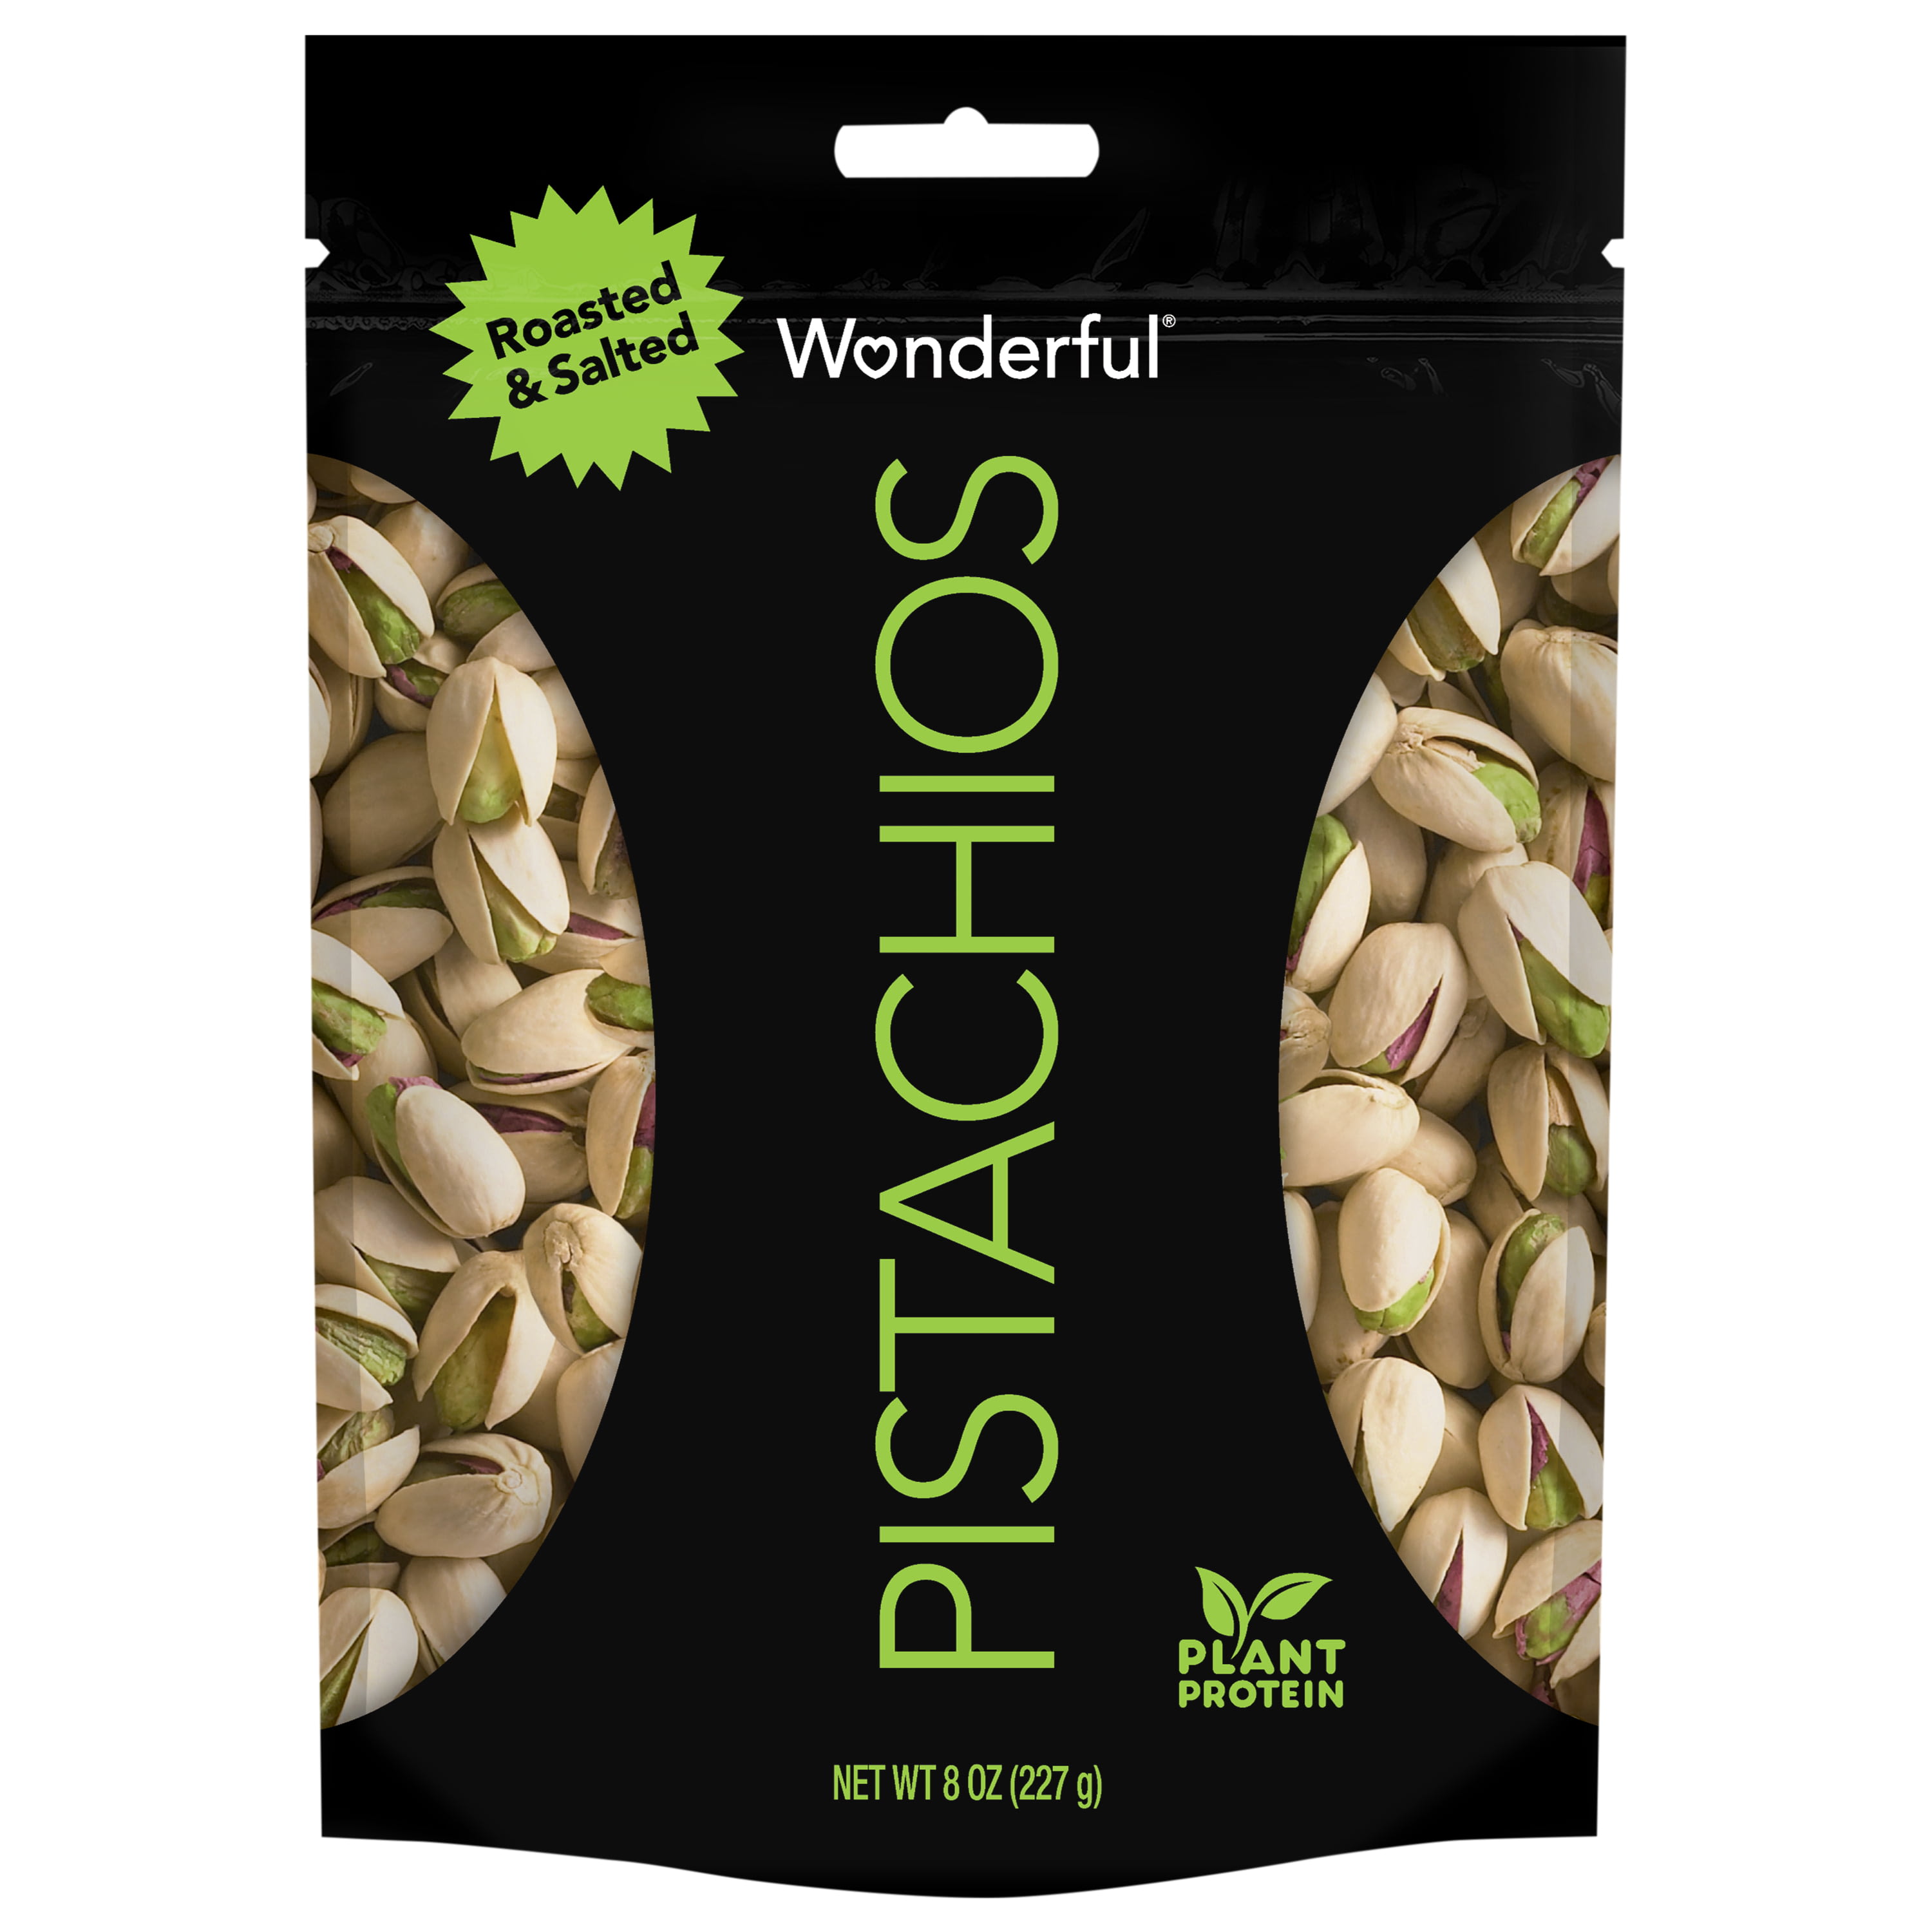 Wonderful Pistachios, No Shells, Honey Roasted, 2.25 Ounce Bag, (Pack of 8)